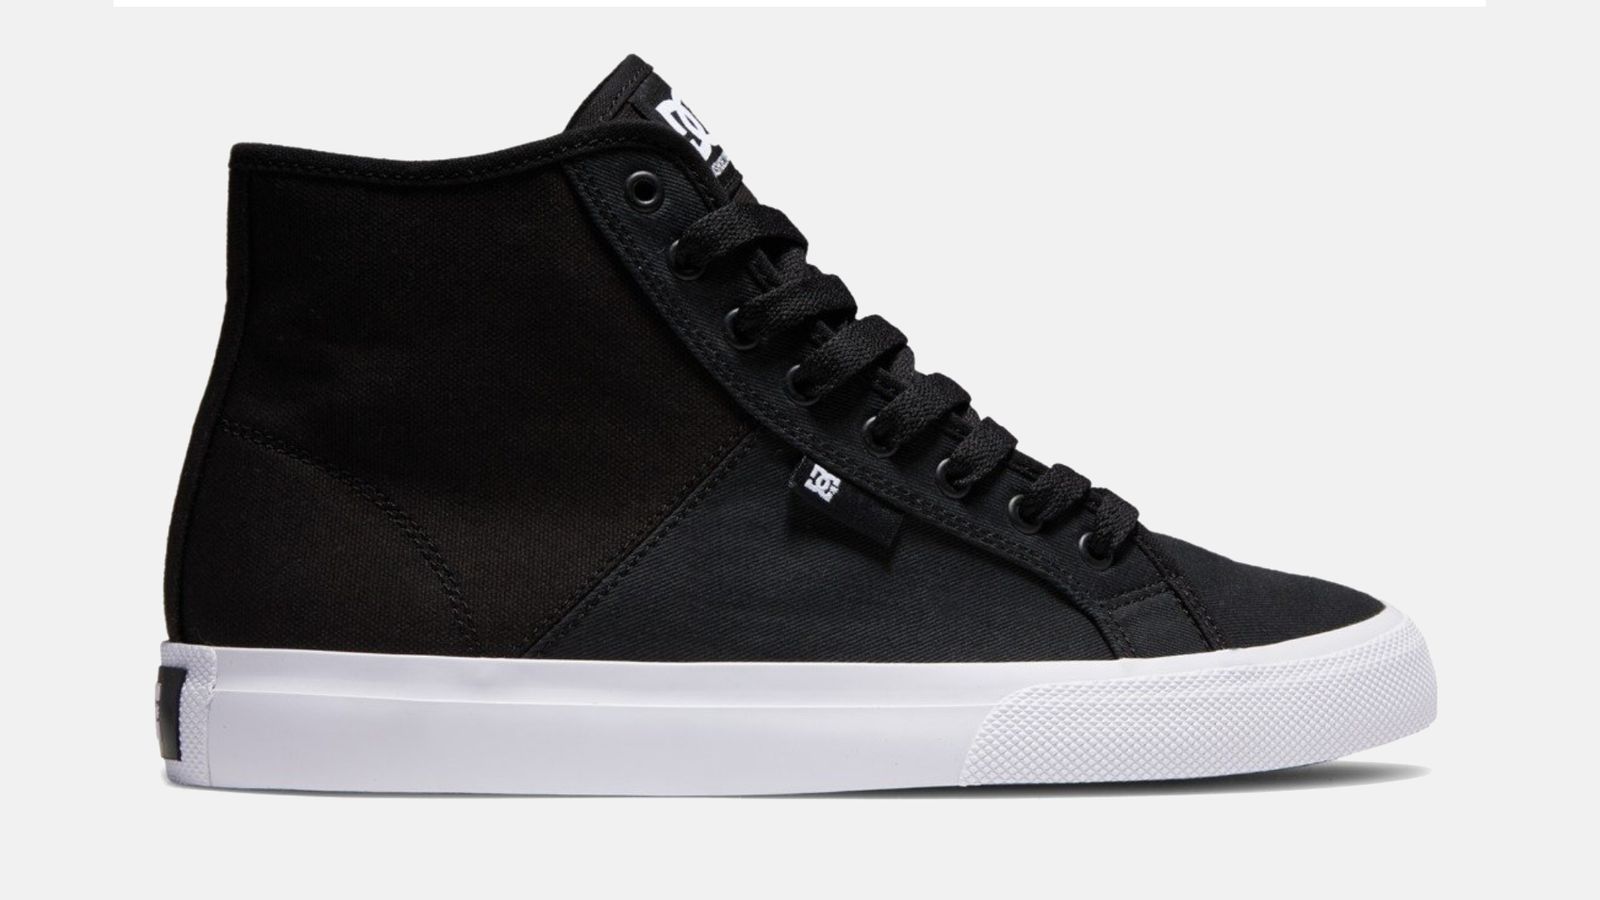 DC Manual Hi Txse product image of a black high-top featuring a white midsole.